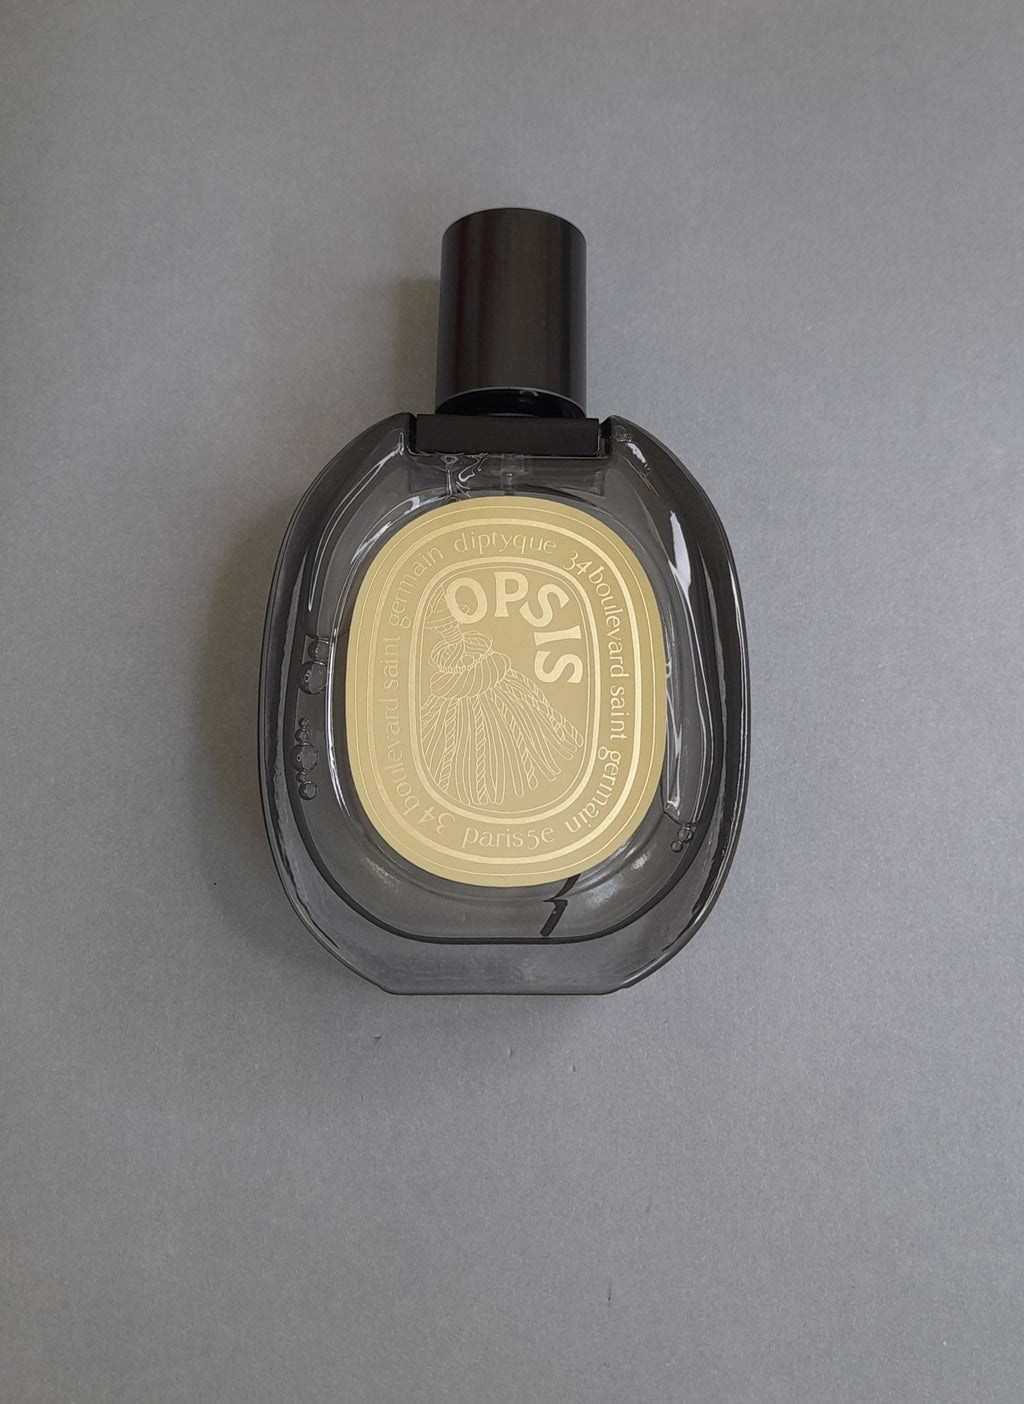 Diptyque Opsis EDP